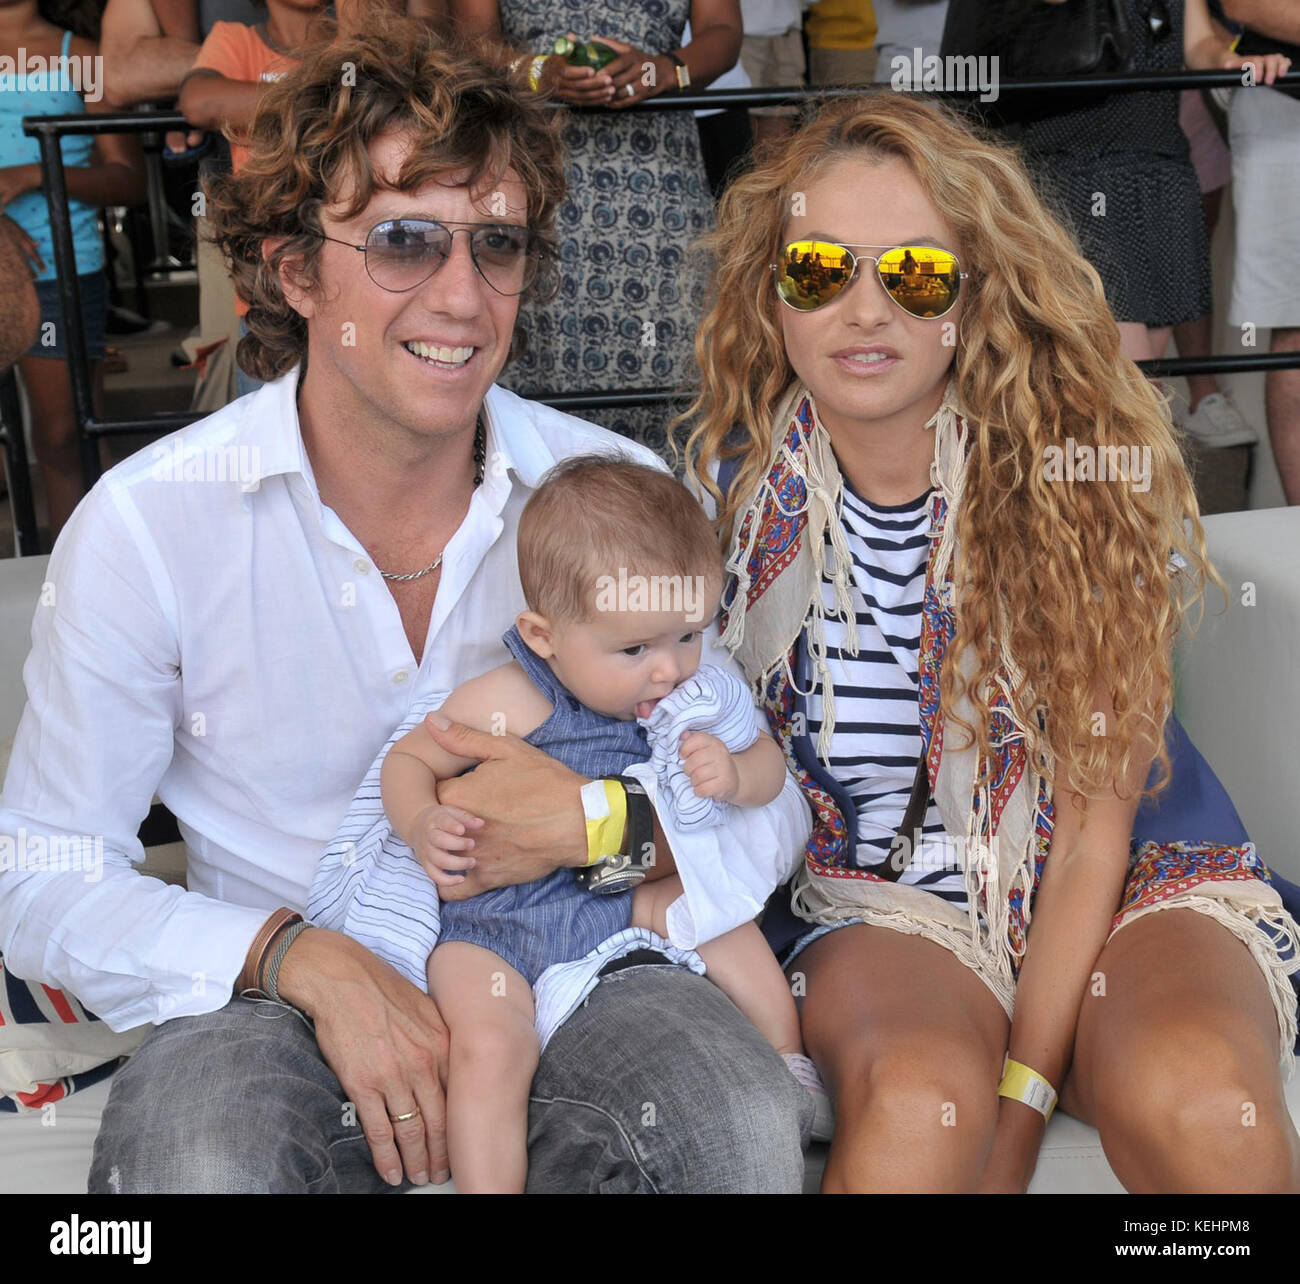 MIAMI, FL - APRIL 30: Paulina Rubio with her new born and husband Nicolas Vallejo Nagera at the inaugural Beach Soccer Worldwide Miami Cup.  Paulina Susana Rubio Rue (born June 17, 1971 is a Mexican singer and actress. Rubio achieved international stardom with her fifth studio album, Paulina (2000), and has sold over 21 million albums. Rubio placed as the 7th most successful Latin Pop Song Artist of the last decade per Billboard Magazine. on April 30, 2011 in Miami, Florida.    People:  Nicolas Vallejo Nagera Paulina Rubio   Transmission Ref:  FLXX    Credit: Hoo-me.com/MediaPunch Stock Photo